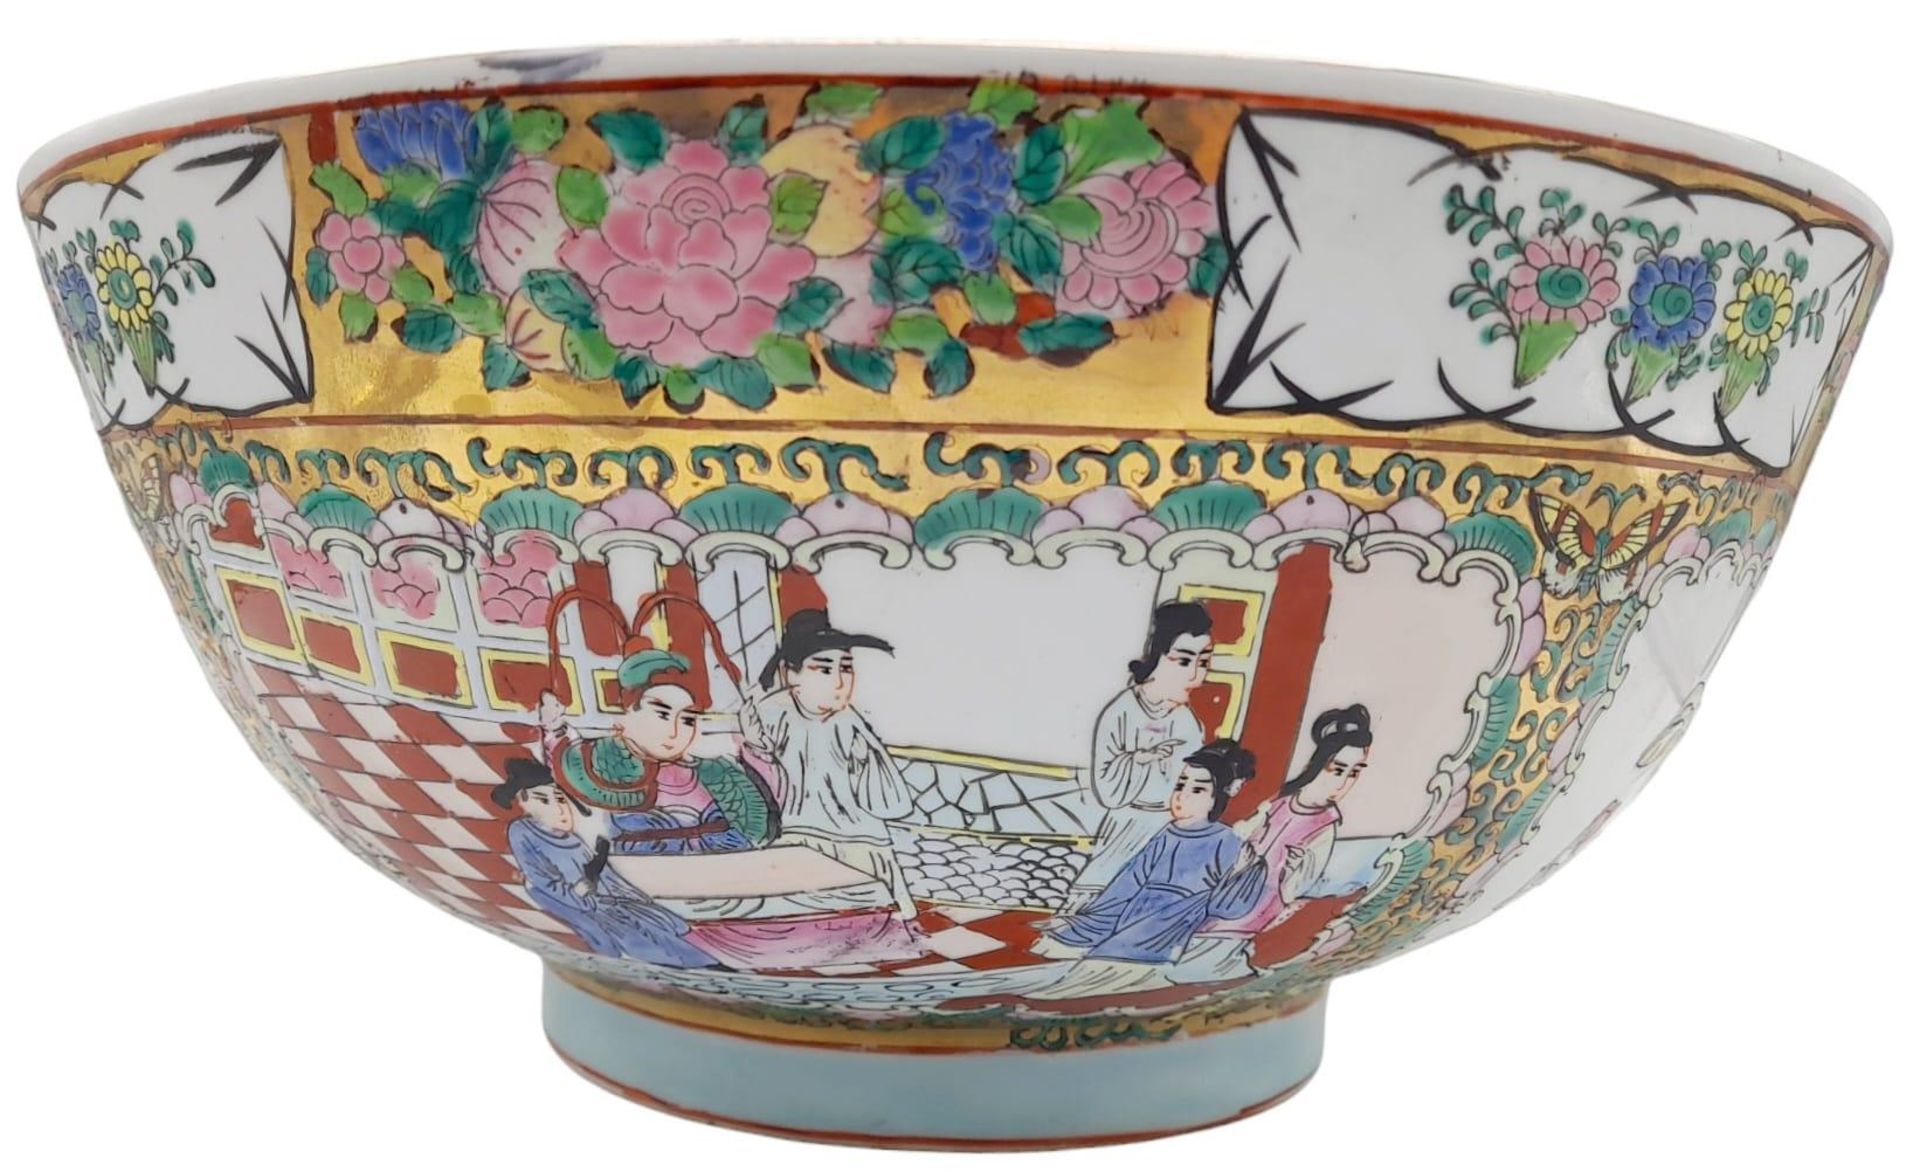 A Very Large Antique Chinese Famille Rose Bowl. Beautiful colours depicting court scenes amongst - Image 6 of 8